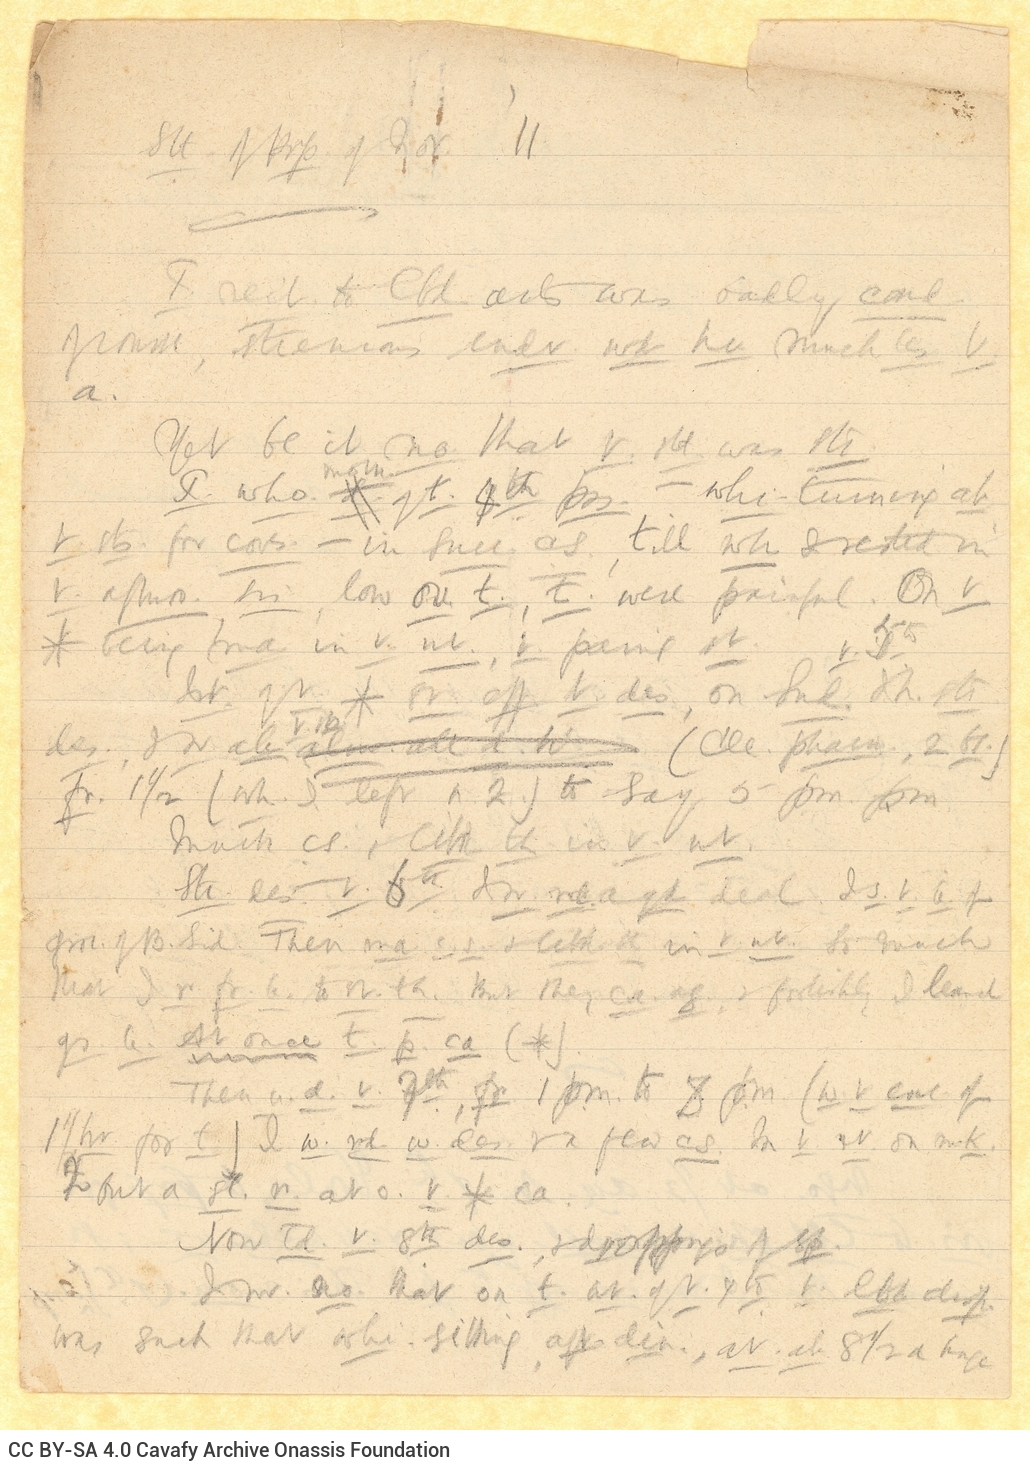 Handwritten notes by Cavafy on the first three pages of a bifolio. The last page is blank. Extensive use of abbreviations.